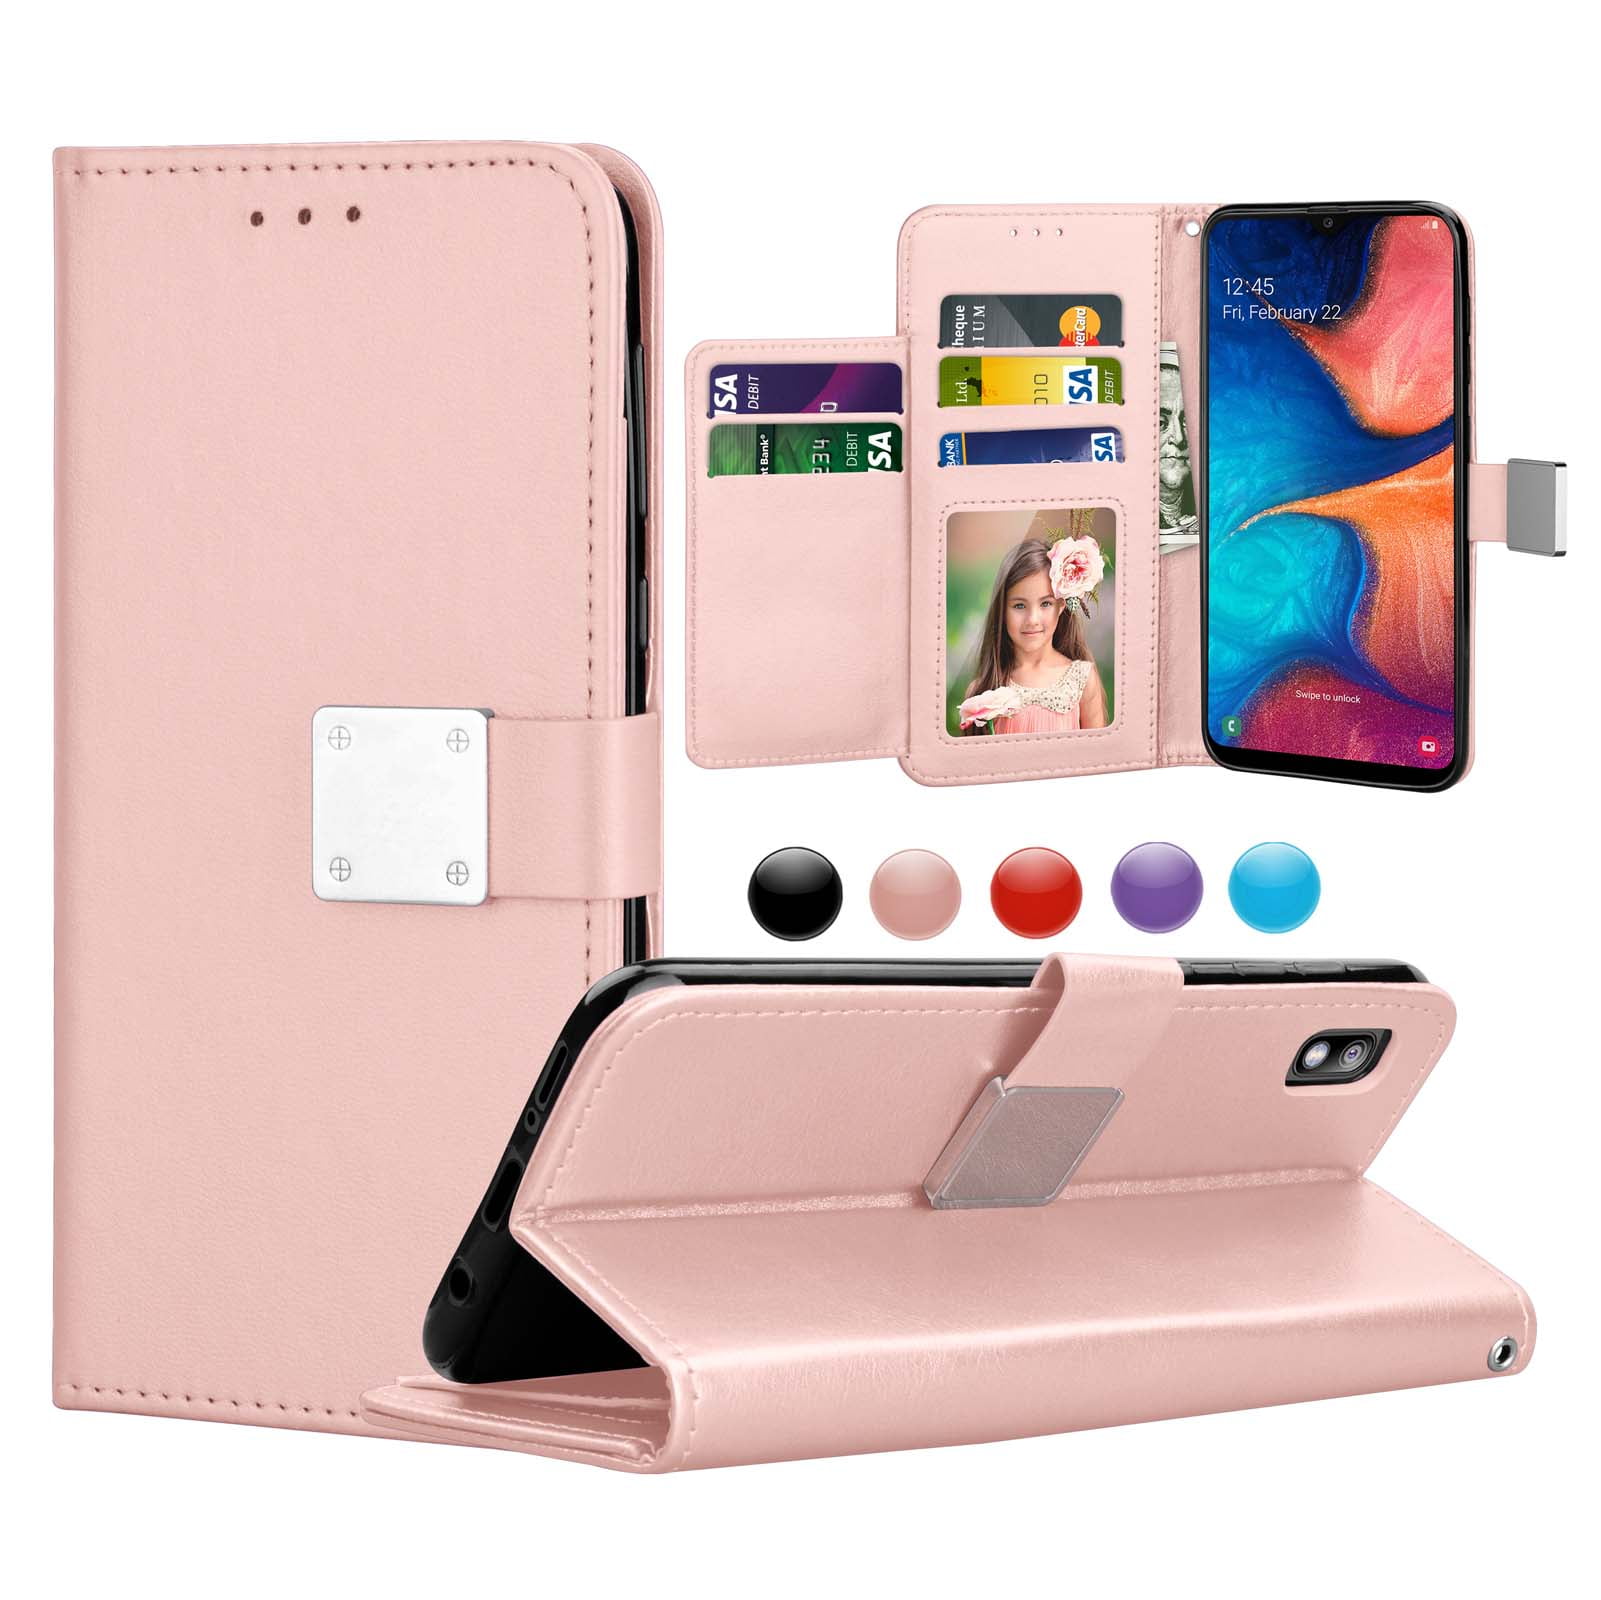 Magnetic Closure Flip Notebook Cover Do not touch my phone Bookstyle Wallet Case for Samsung Galaxy S10+,Premium PU Leather Flip Case Folio Cover TPU Shockproof Cover with Card Slots Kickstand